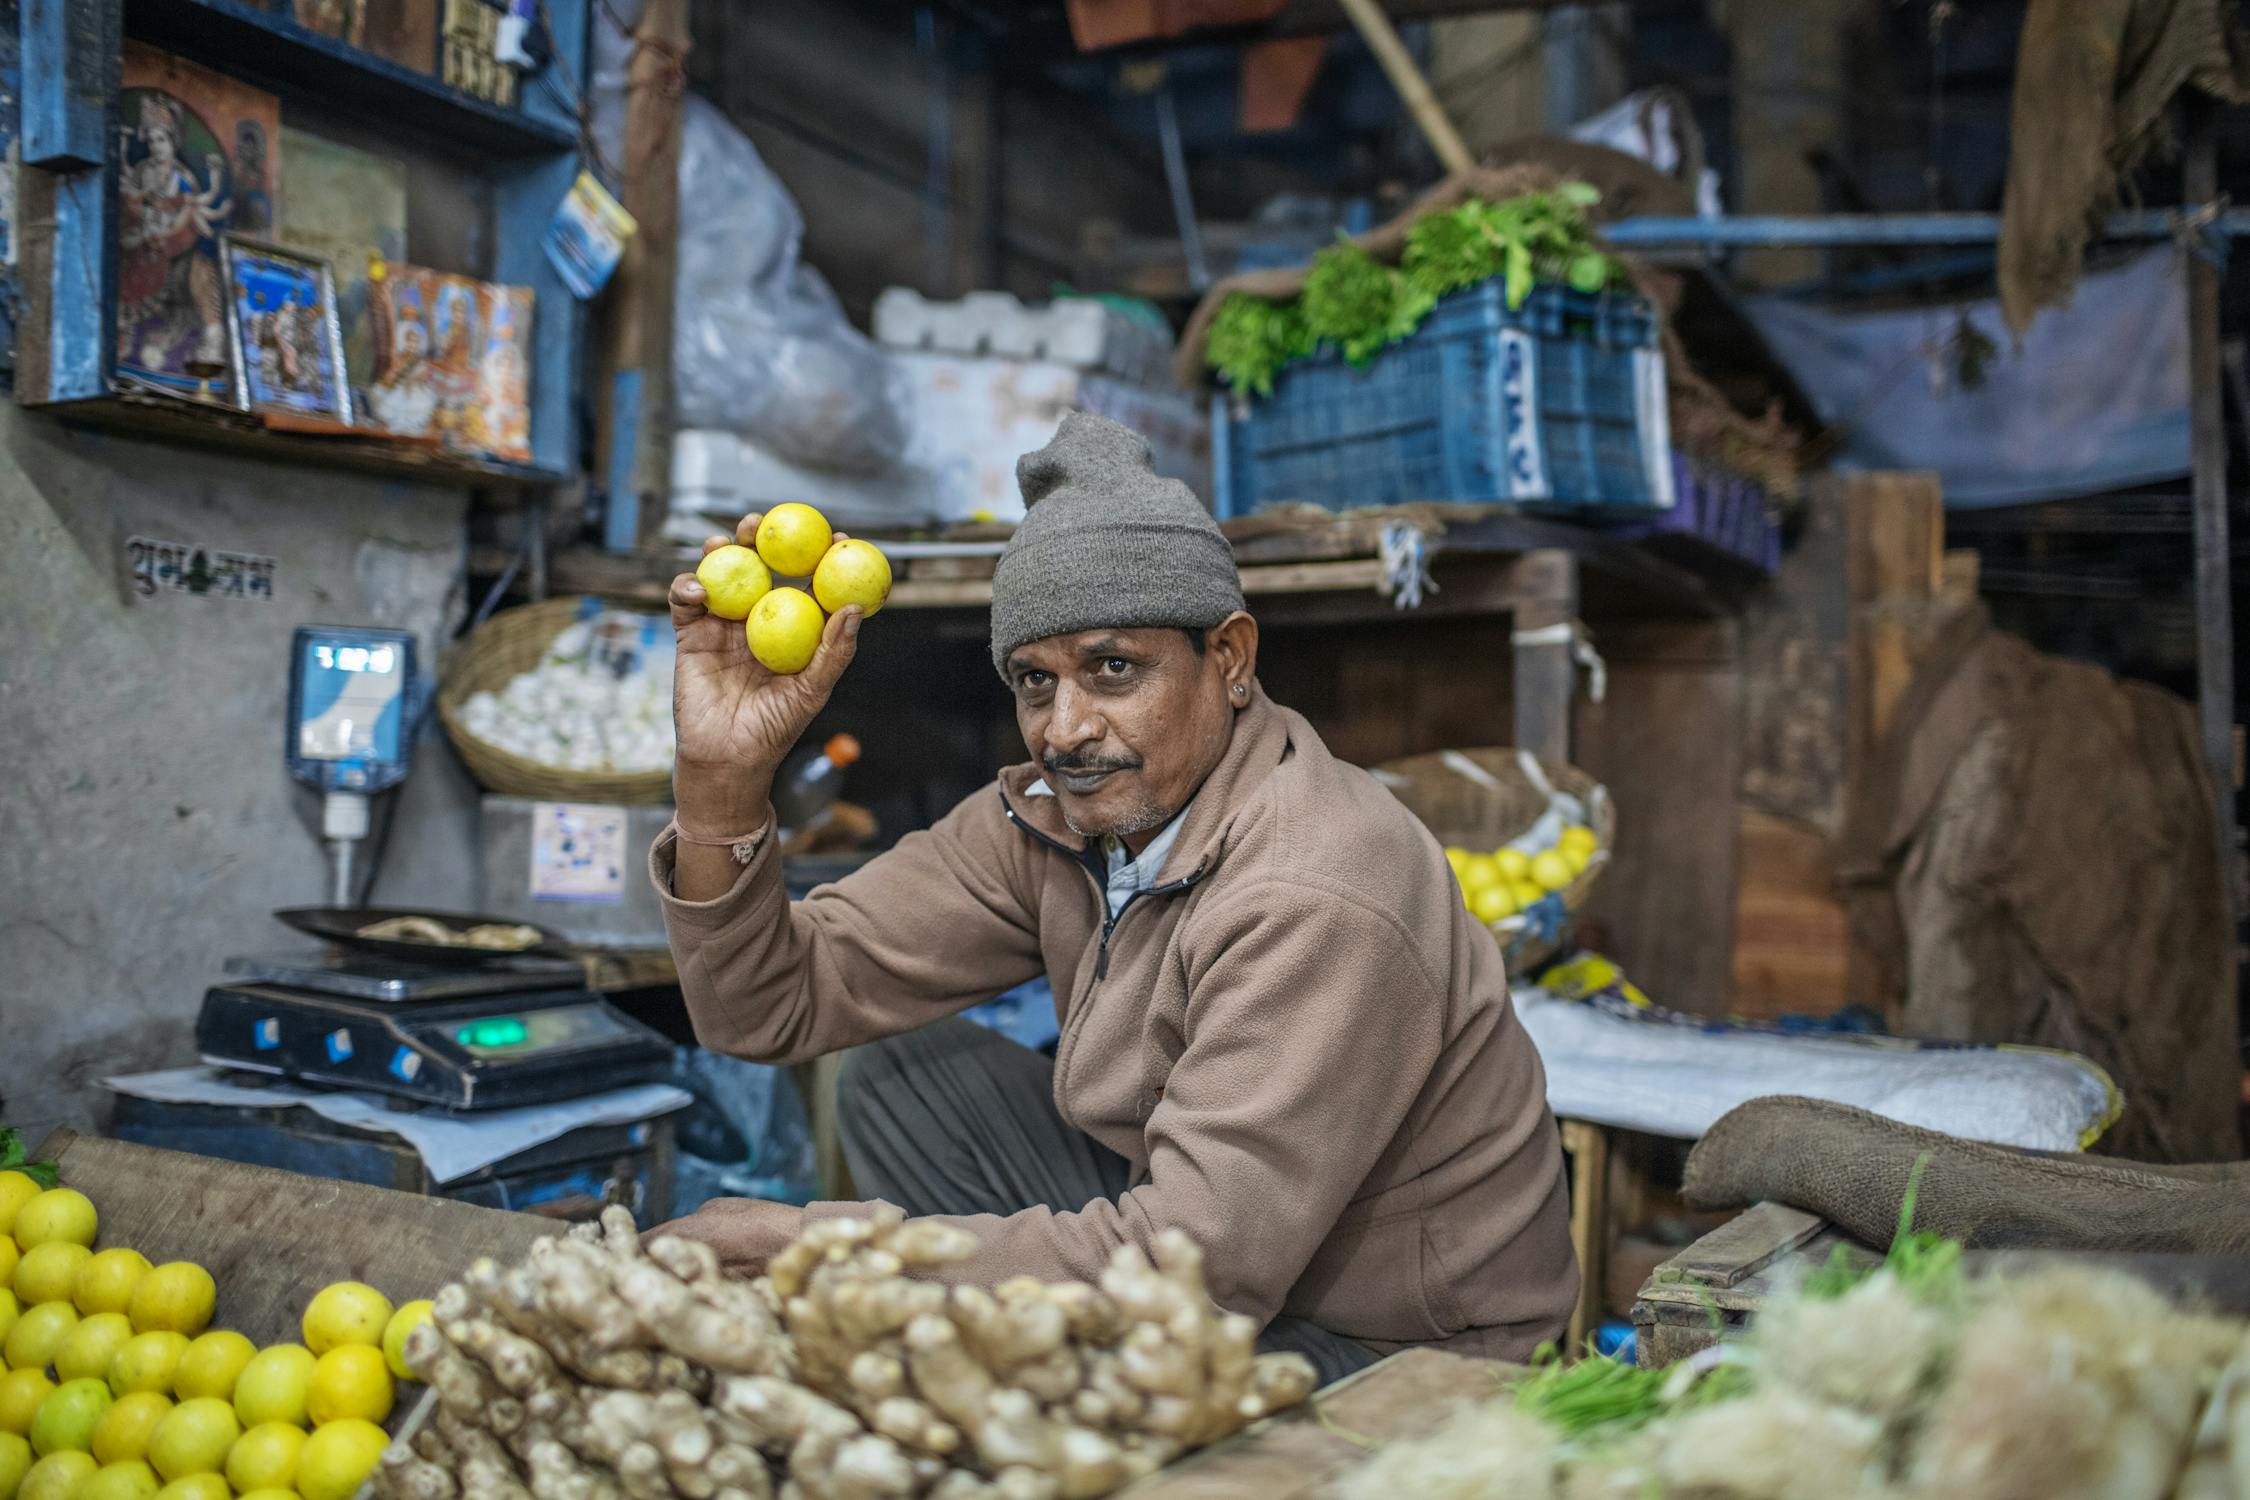 Indian Street Vendor Photo by Anton Polyakov from Pexels: https://www.pexels.com/photo/ethnic-vendor-on-market-with-fruit-5758168/